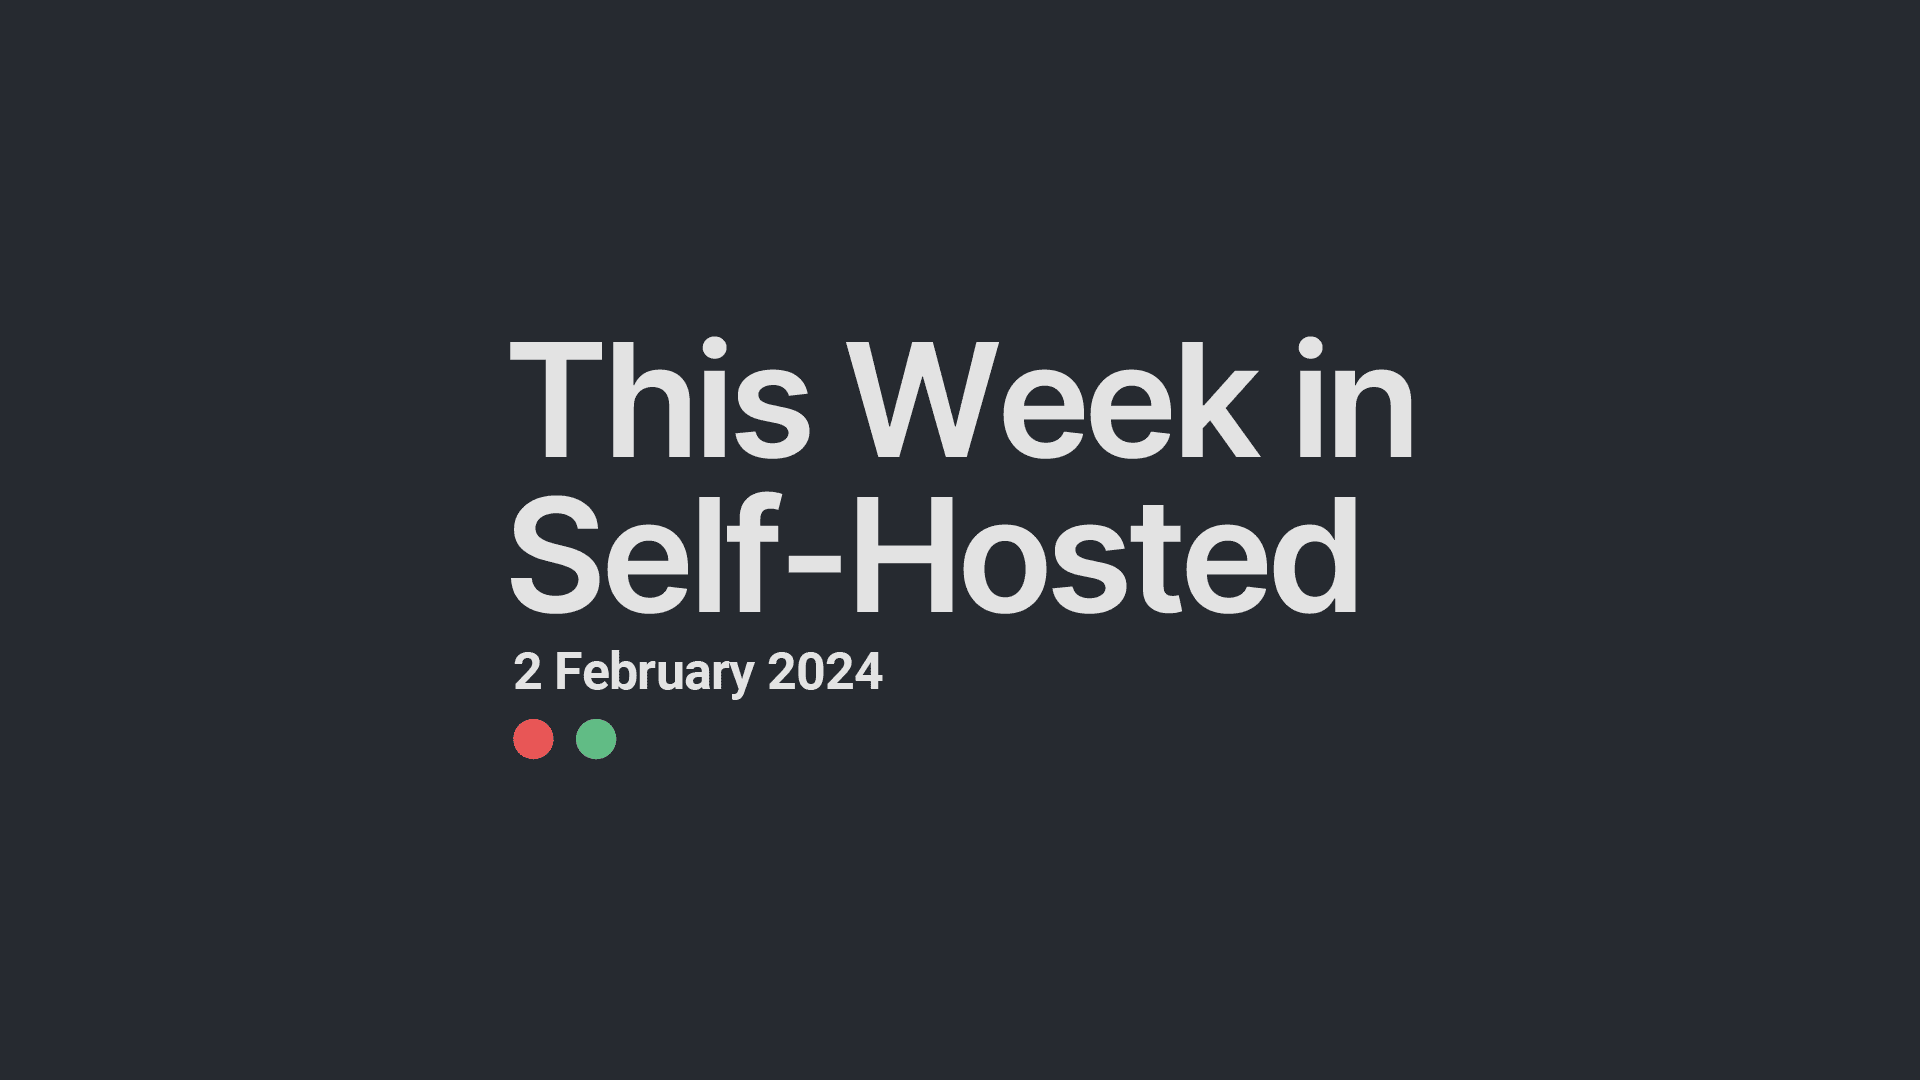 This Week in Self-Hosted (2 February 2024) Post image